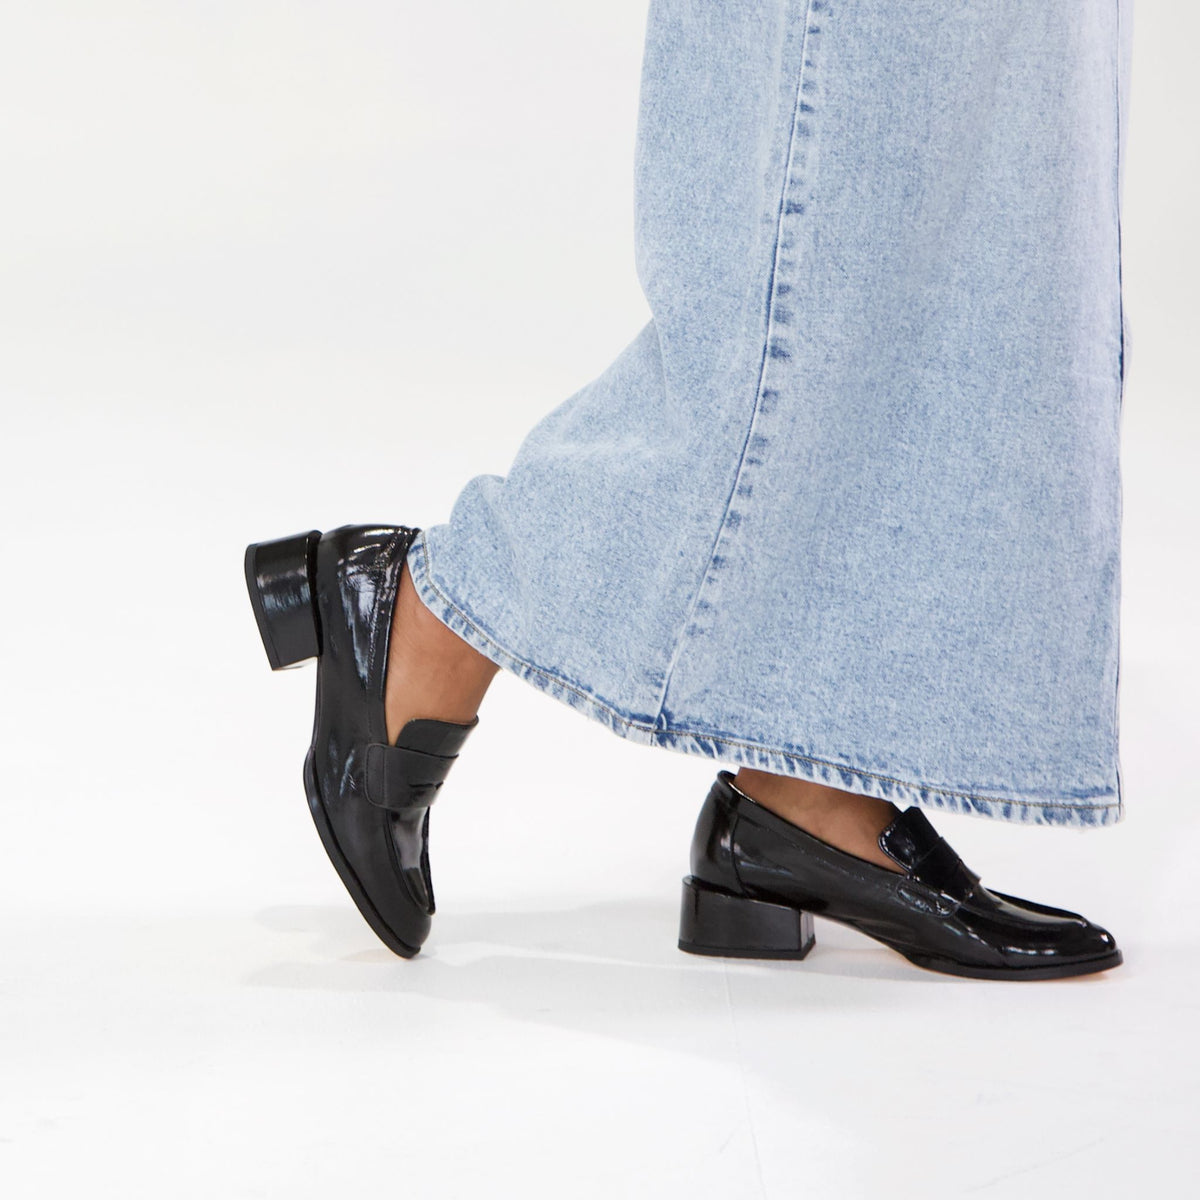 Cass Black Crinkle Loafers